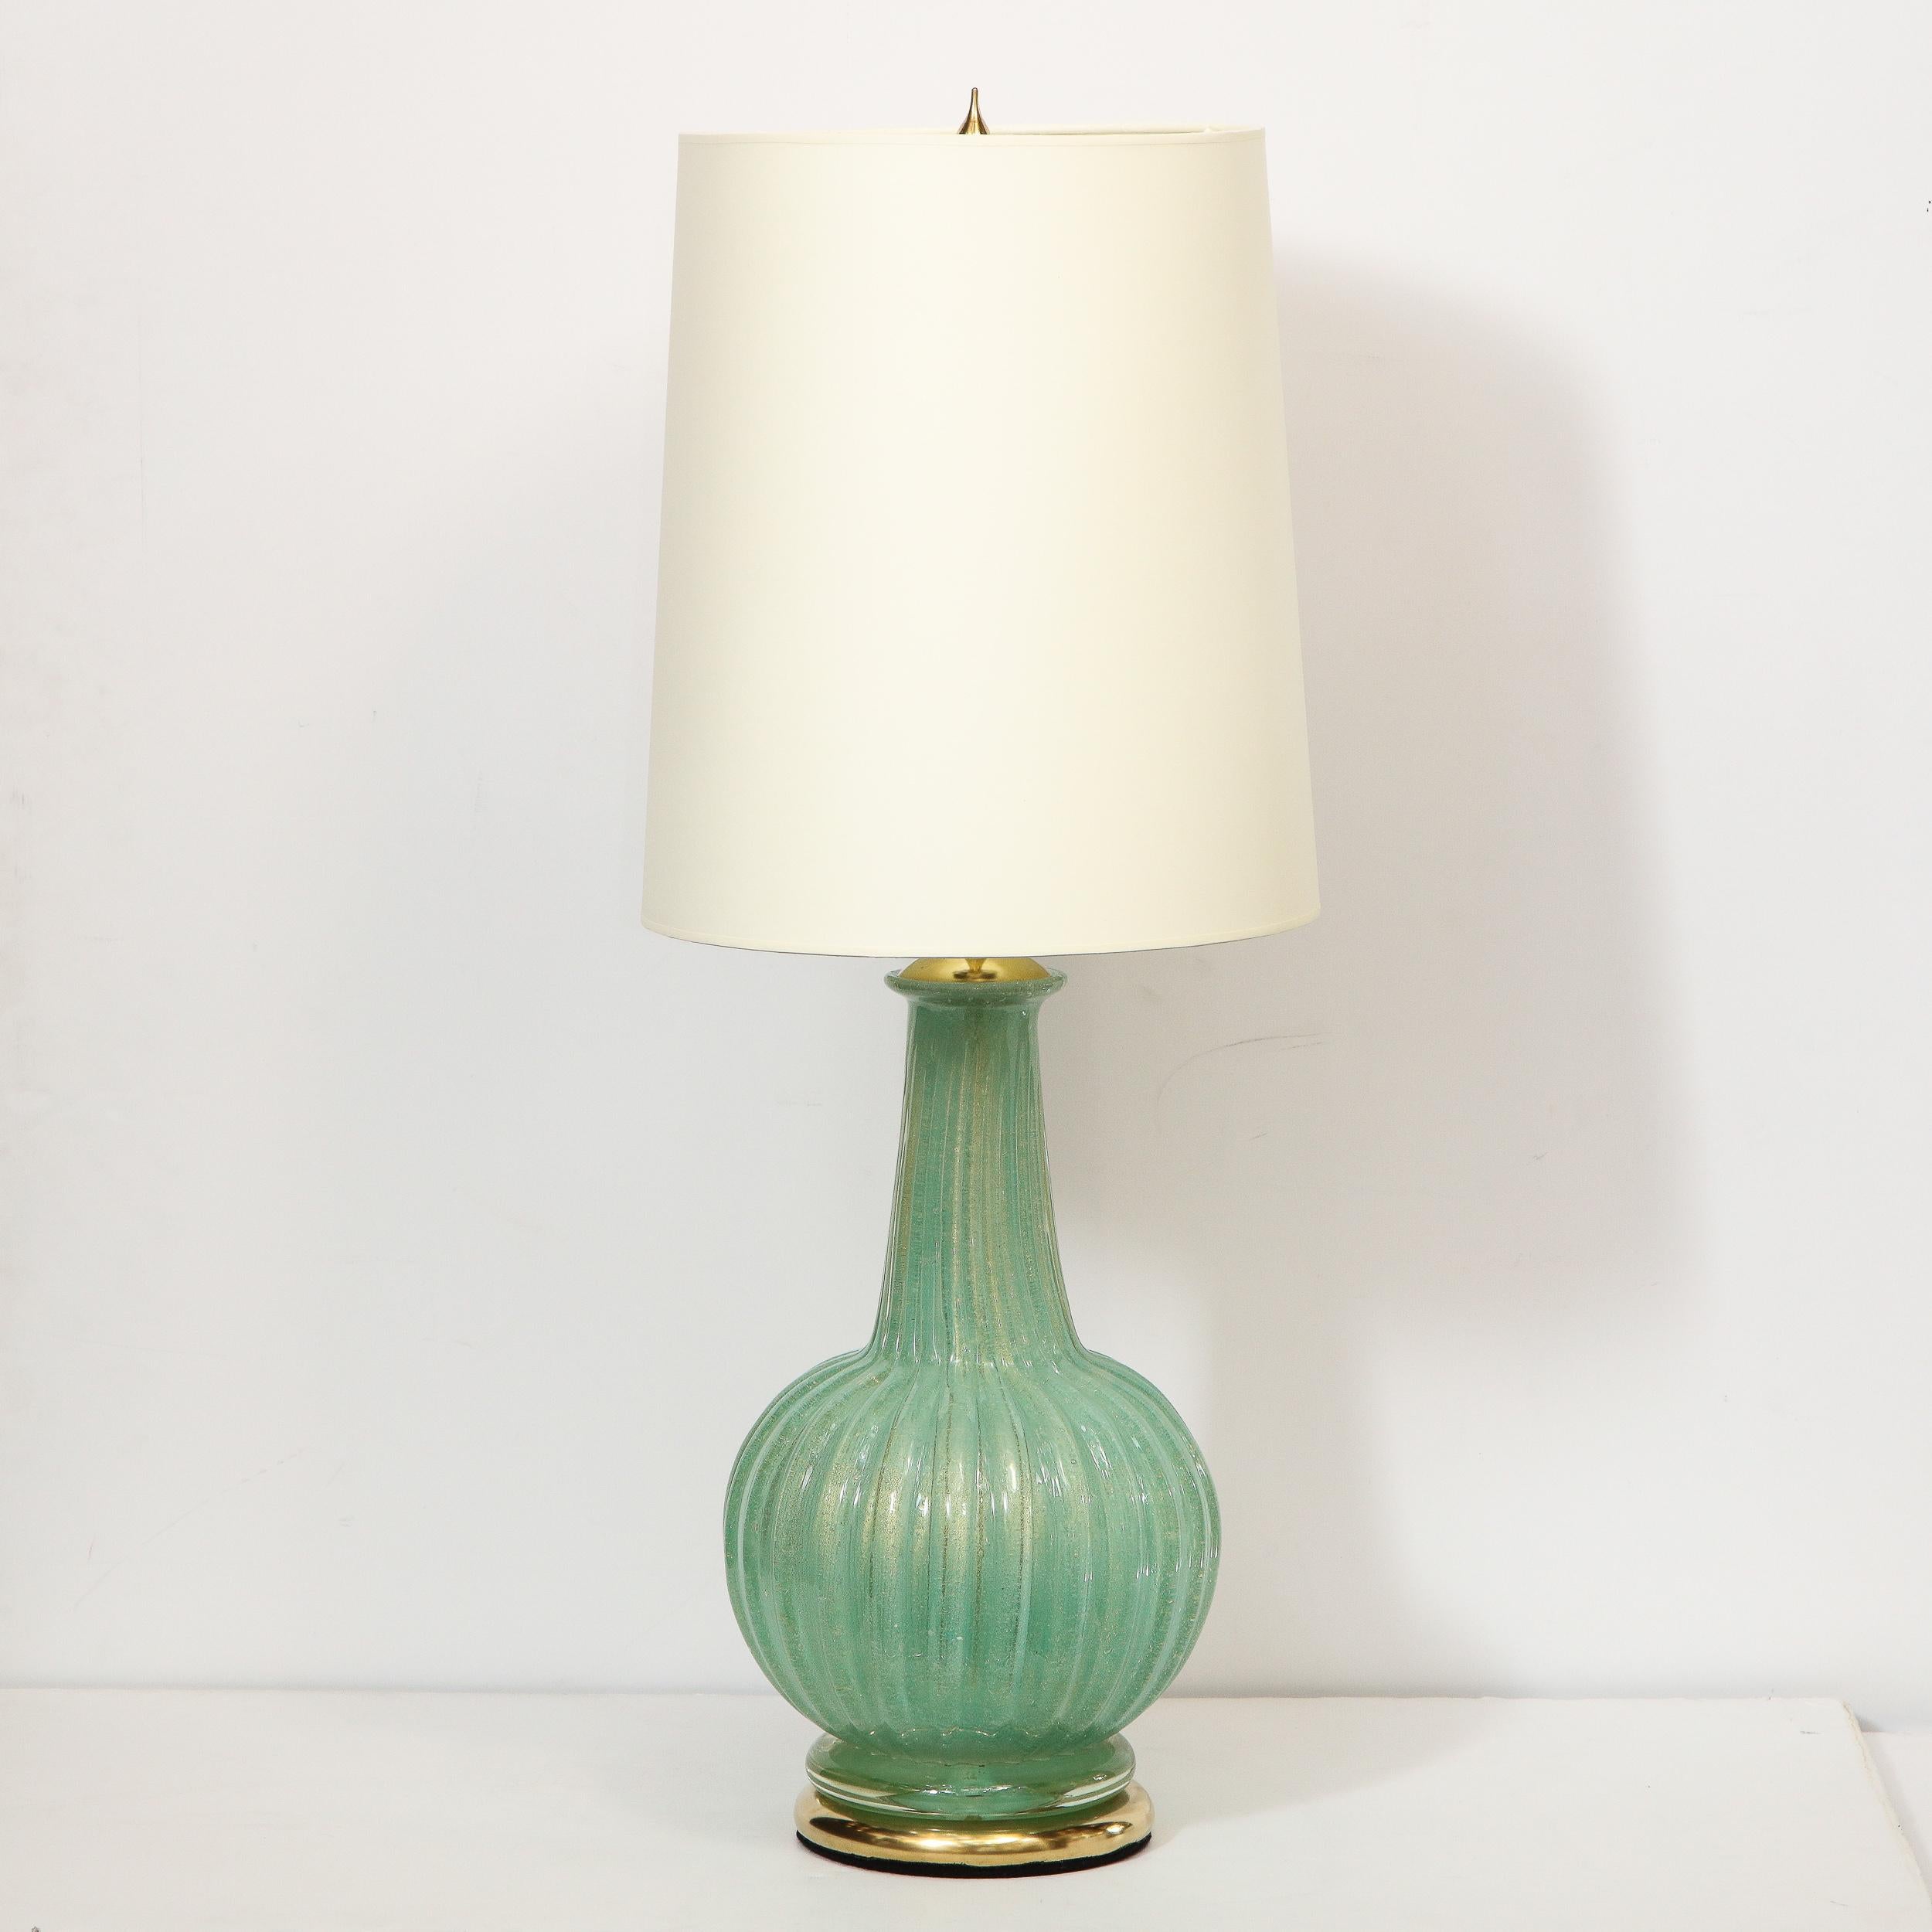 Mid-Century Modern Pair of Midcentury Channeled Table Lamps with Brass Detailing, Barovier e Toso